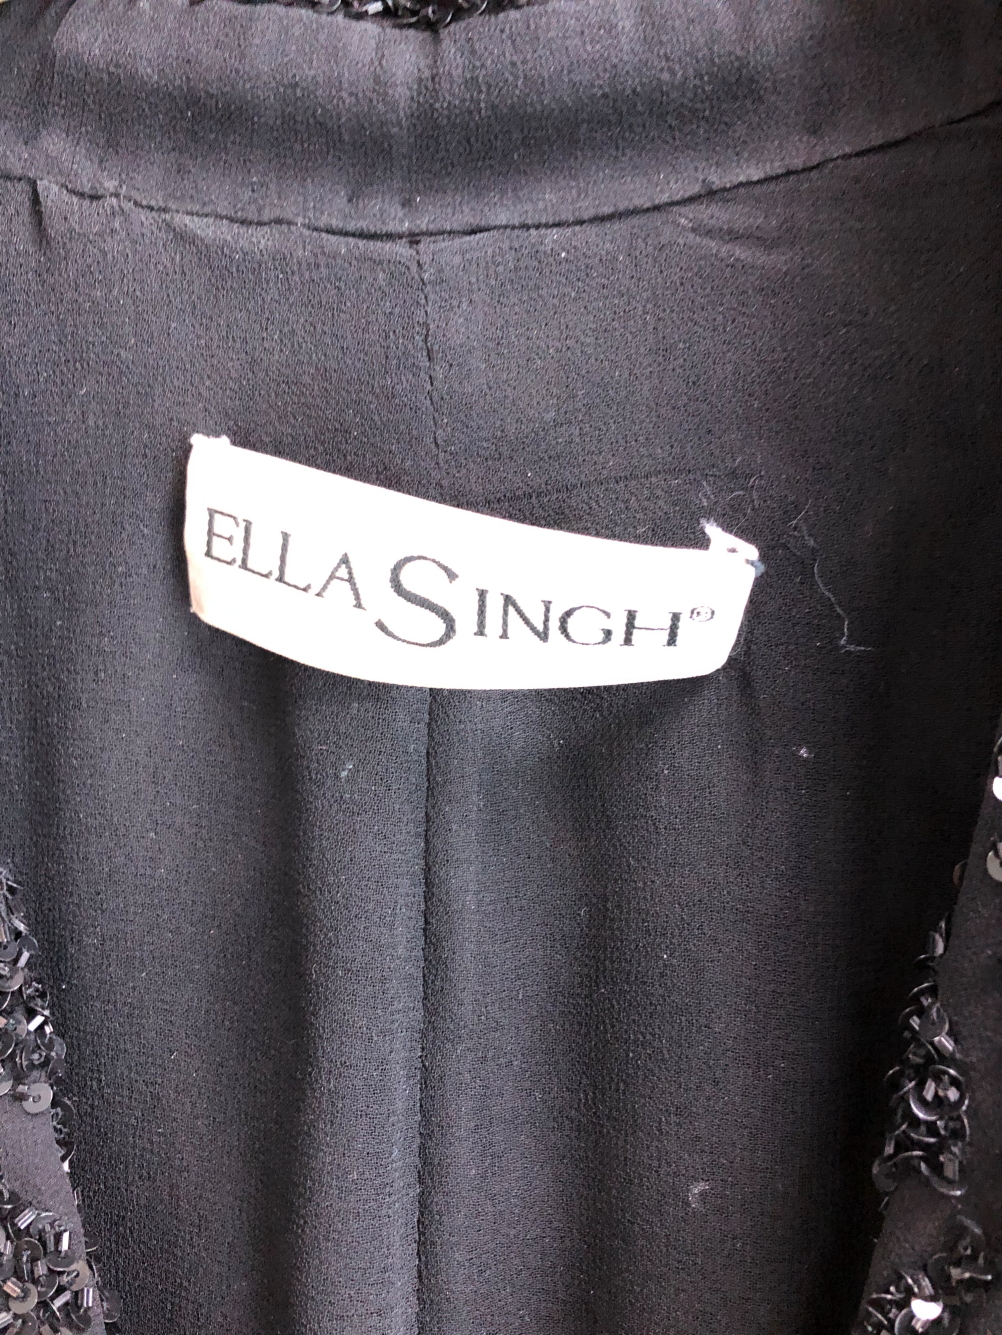 A ELLA SINGH BLACK SEQUIN JACKET SIZE 42 AND MATCHING VEST TOP SIZE 40 - Image 2 of 7